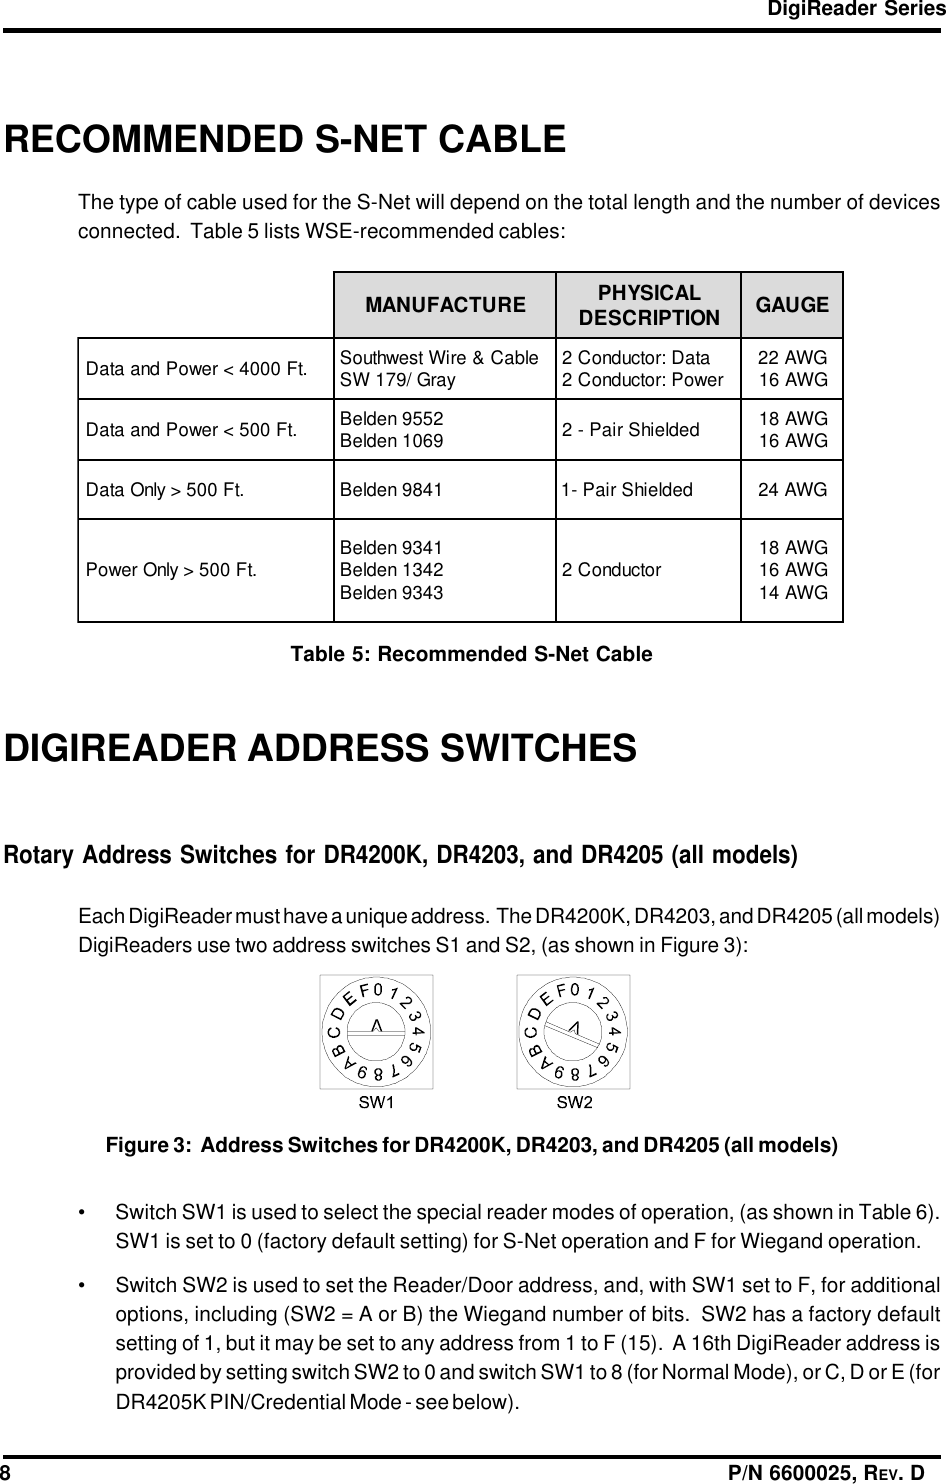 DigiReader Series8                                                                                                                  P/N 6600025, REV. DRECOMMENDED S-NET CABLEThe type of cable used for the S-Net will depend on the total length and the number of devicesconnected.  Table 5 lists WSE-recommended cables:Table 5: Recommended S-Net CableDIGIREADER ADDRESS SWITCHESRotary Address Switches for DR4200K, DR4203, and DR4205 (all models)Each DigiReader must have a unique address.  The DR4200K, DR4203, and DR4205 (all models)DigiReaders use two address switches S1 and S2, (as shown in Figure 3):Figure 3:  Address Switches for DR4200K, DR4203, and DR4205 (all models)• Switch SW1 is used to select the special reader modes of operation, (as shown in Table 6).SW1 is set to 0 (factory default setting) for S-Net operation and F for Wiegand operation.• Switch SW2 is used to set the Reader/Door address, and, with SW1 set to F, for additionaloptions, including (SW2 = A or B) the Wiegand number of bits.  SW2 has a factory defaultsetting of 1, but it may be set to any address from 1 to F (15).  A 16th DigiReader address isprovided by setting switch SW2 to 0 and switch SW1 to 8 (for Normal Mode), or C, D or E (forDR4205K PIN/Credential Mode - see below).ERUTCAFUNAM LACISYHP NOITPIRCSED EGUAG.tF0004&lt;rewoPdnaataD elbaC&amp;eriWtsewhtuoS yarG/971WS ataD:rotcudnoC2 rewoP:rotcudnoC2 GWA22 GWA61.tF005&lt;rewoPdnaataD 2559nedleB 9601nedleB dedleihSriaP-2 GWA81 GWA61.tF005&gt;ylnOataD1489nedleBdedleihSriaP-1GWA42.tF005&gt;ylnOrewoP 1439nedleB 2431nedleB 3439nedleB rotcudnoC2 GWA81 GWA61 GWA41